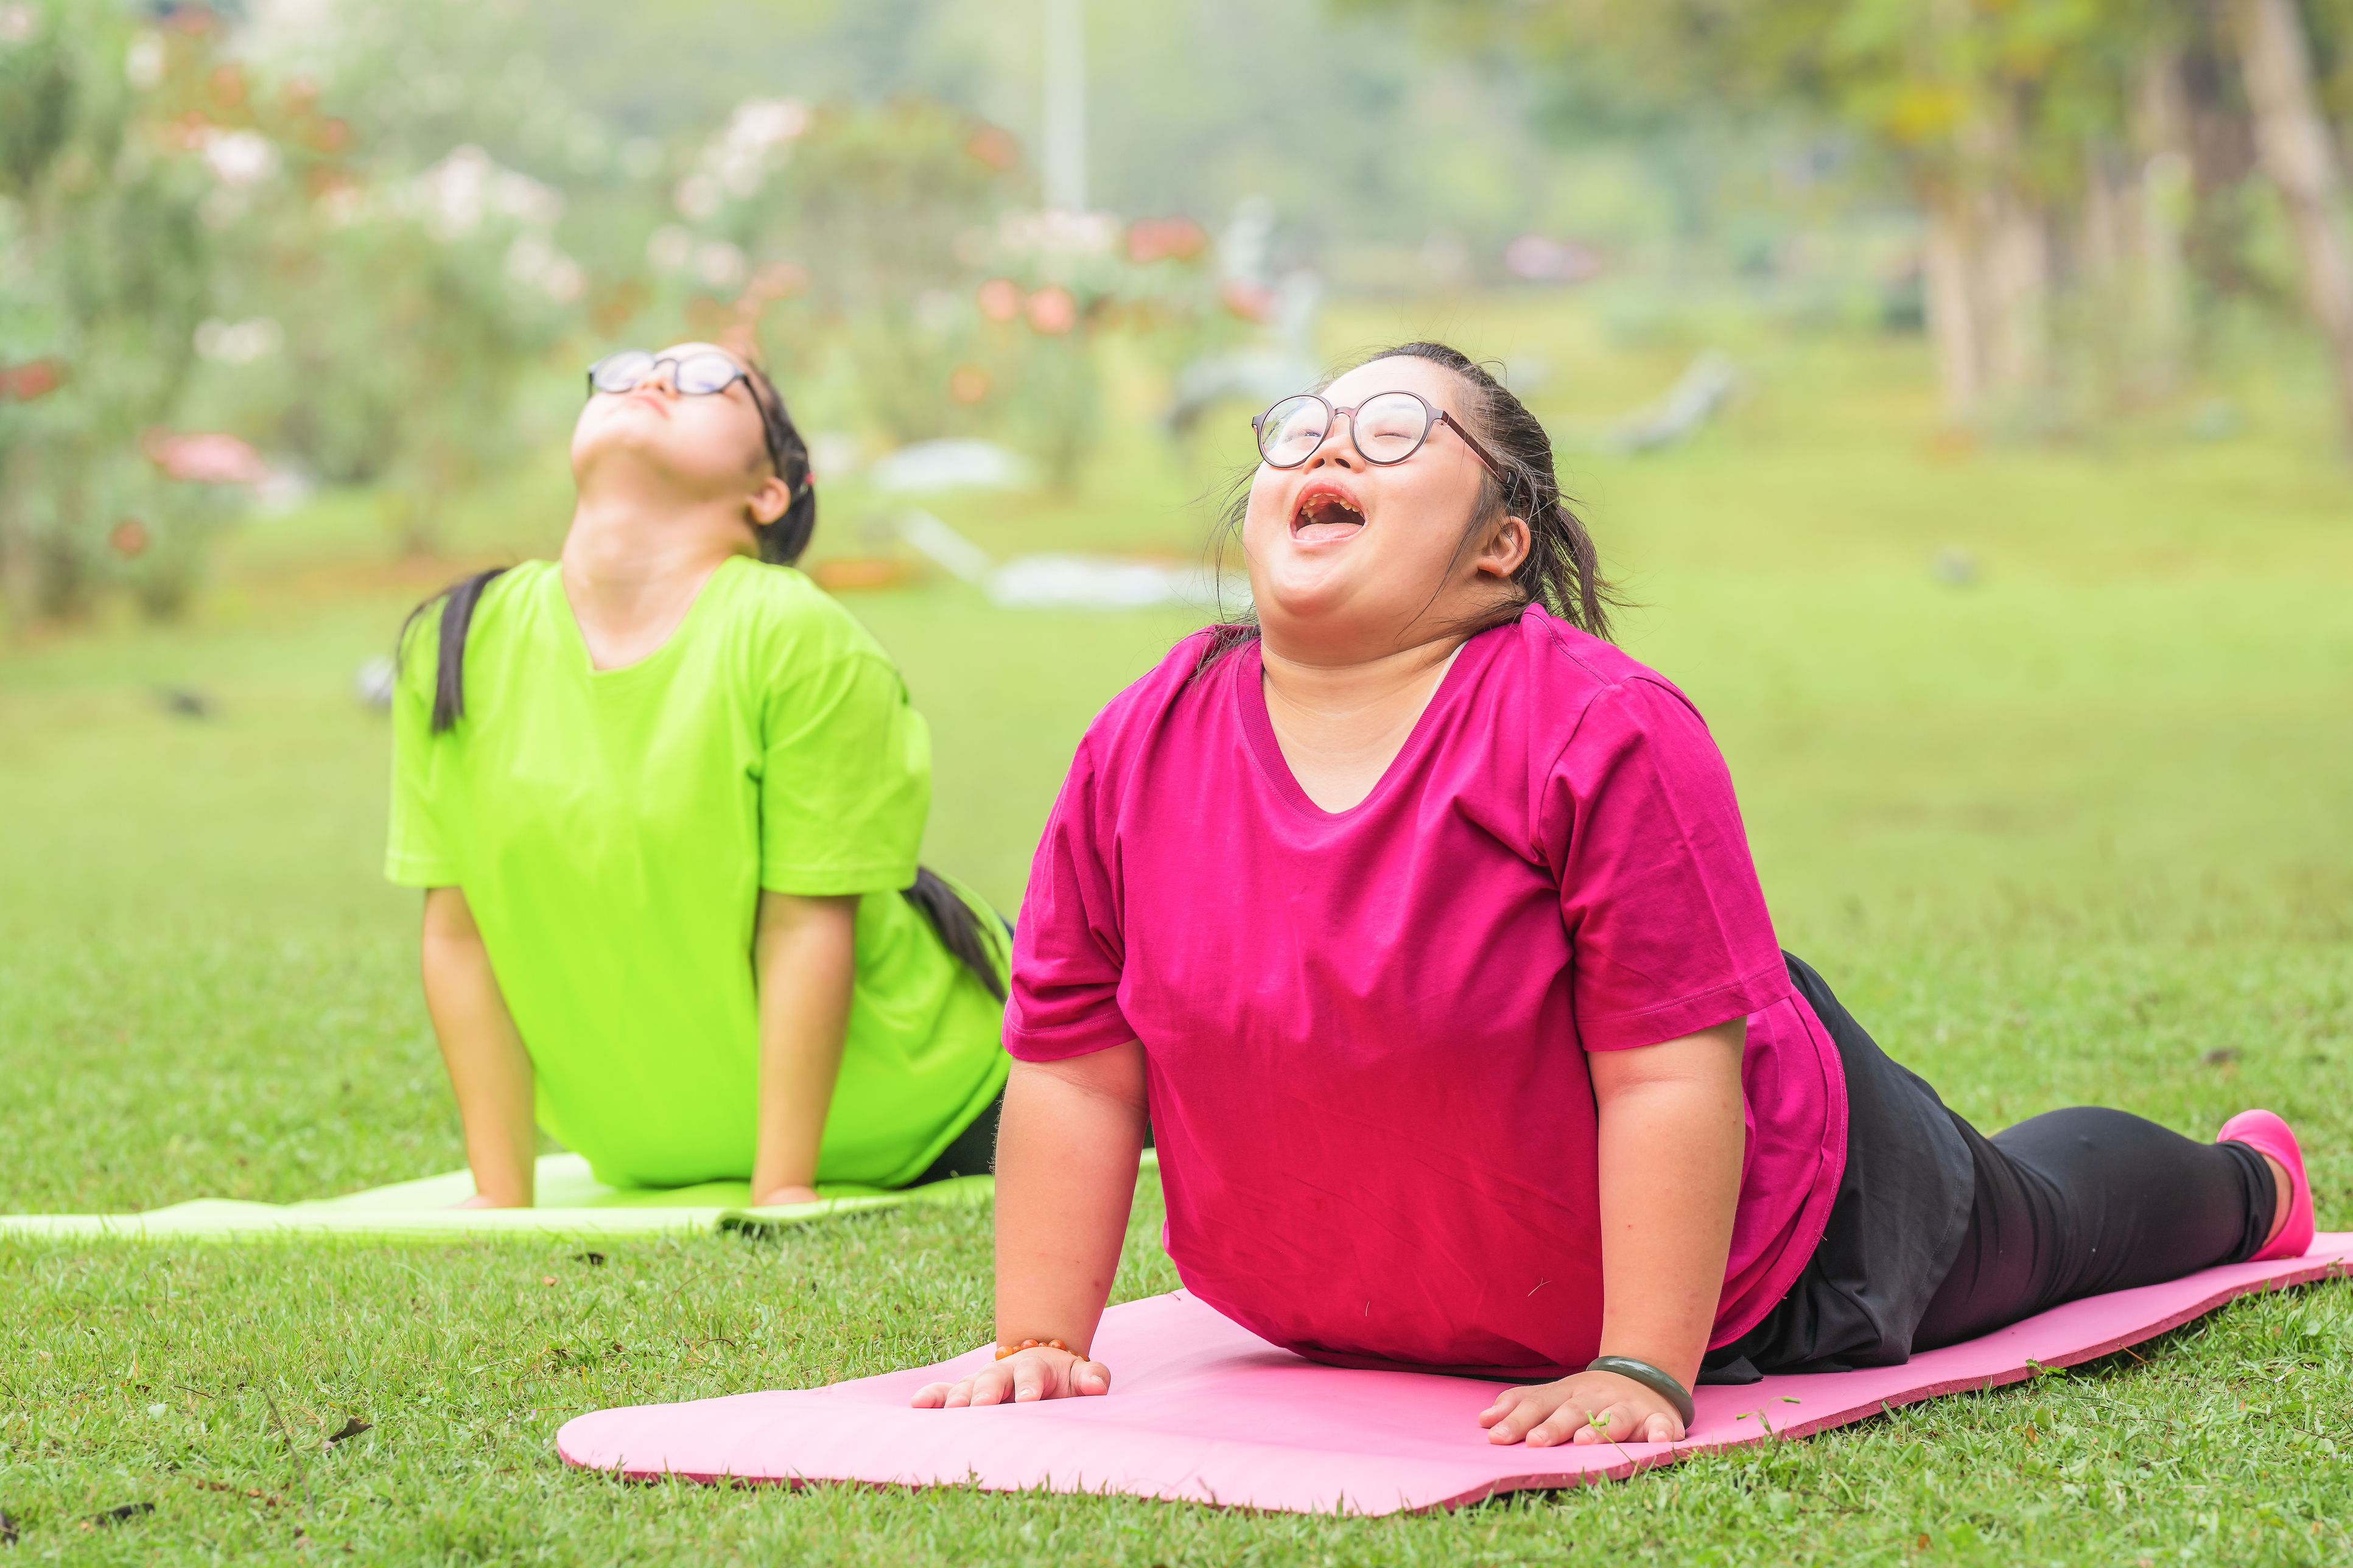 Two young women with Down syndrome practice yoga outdoors